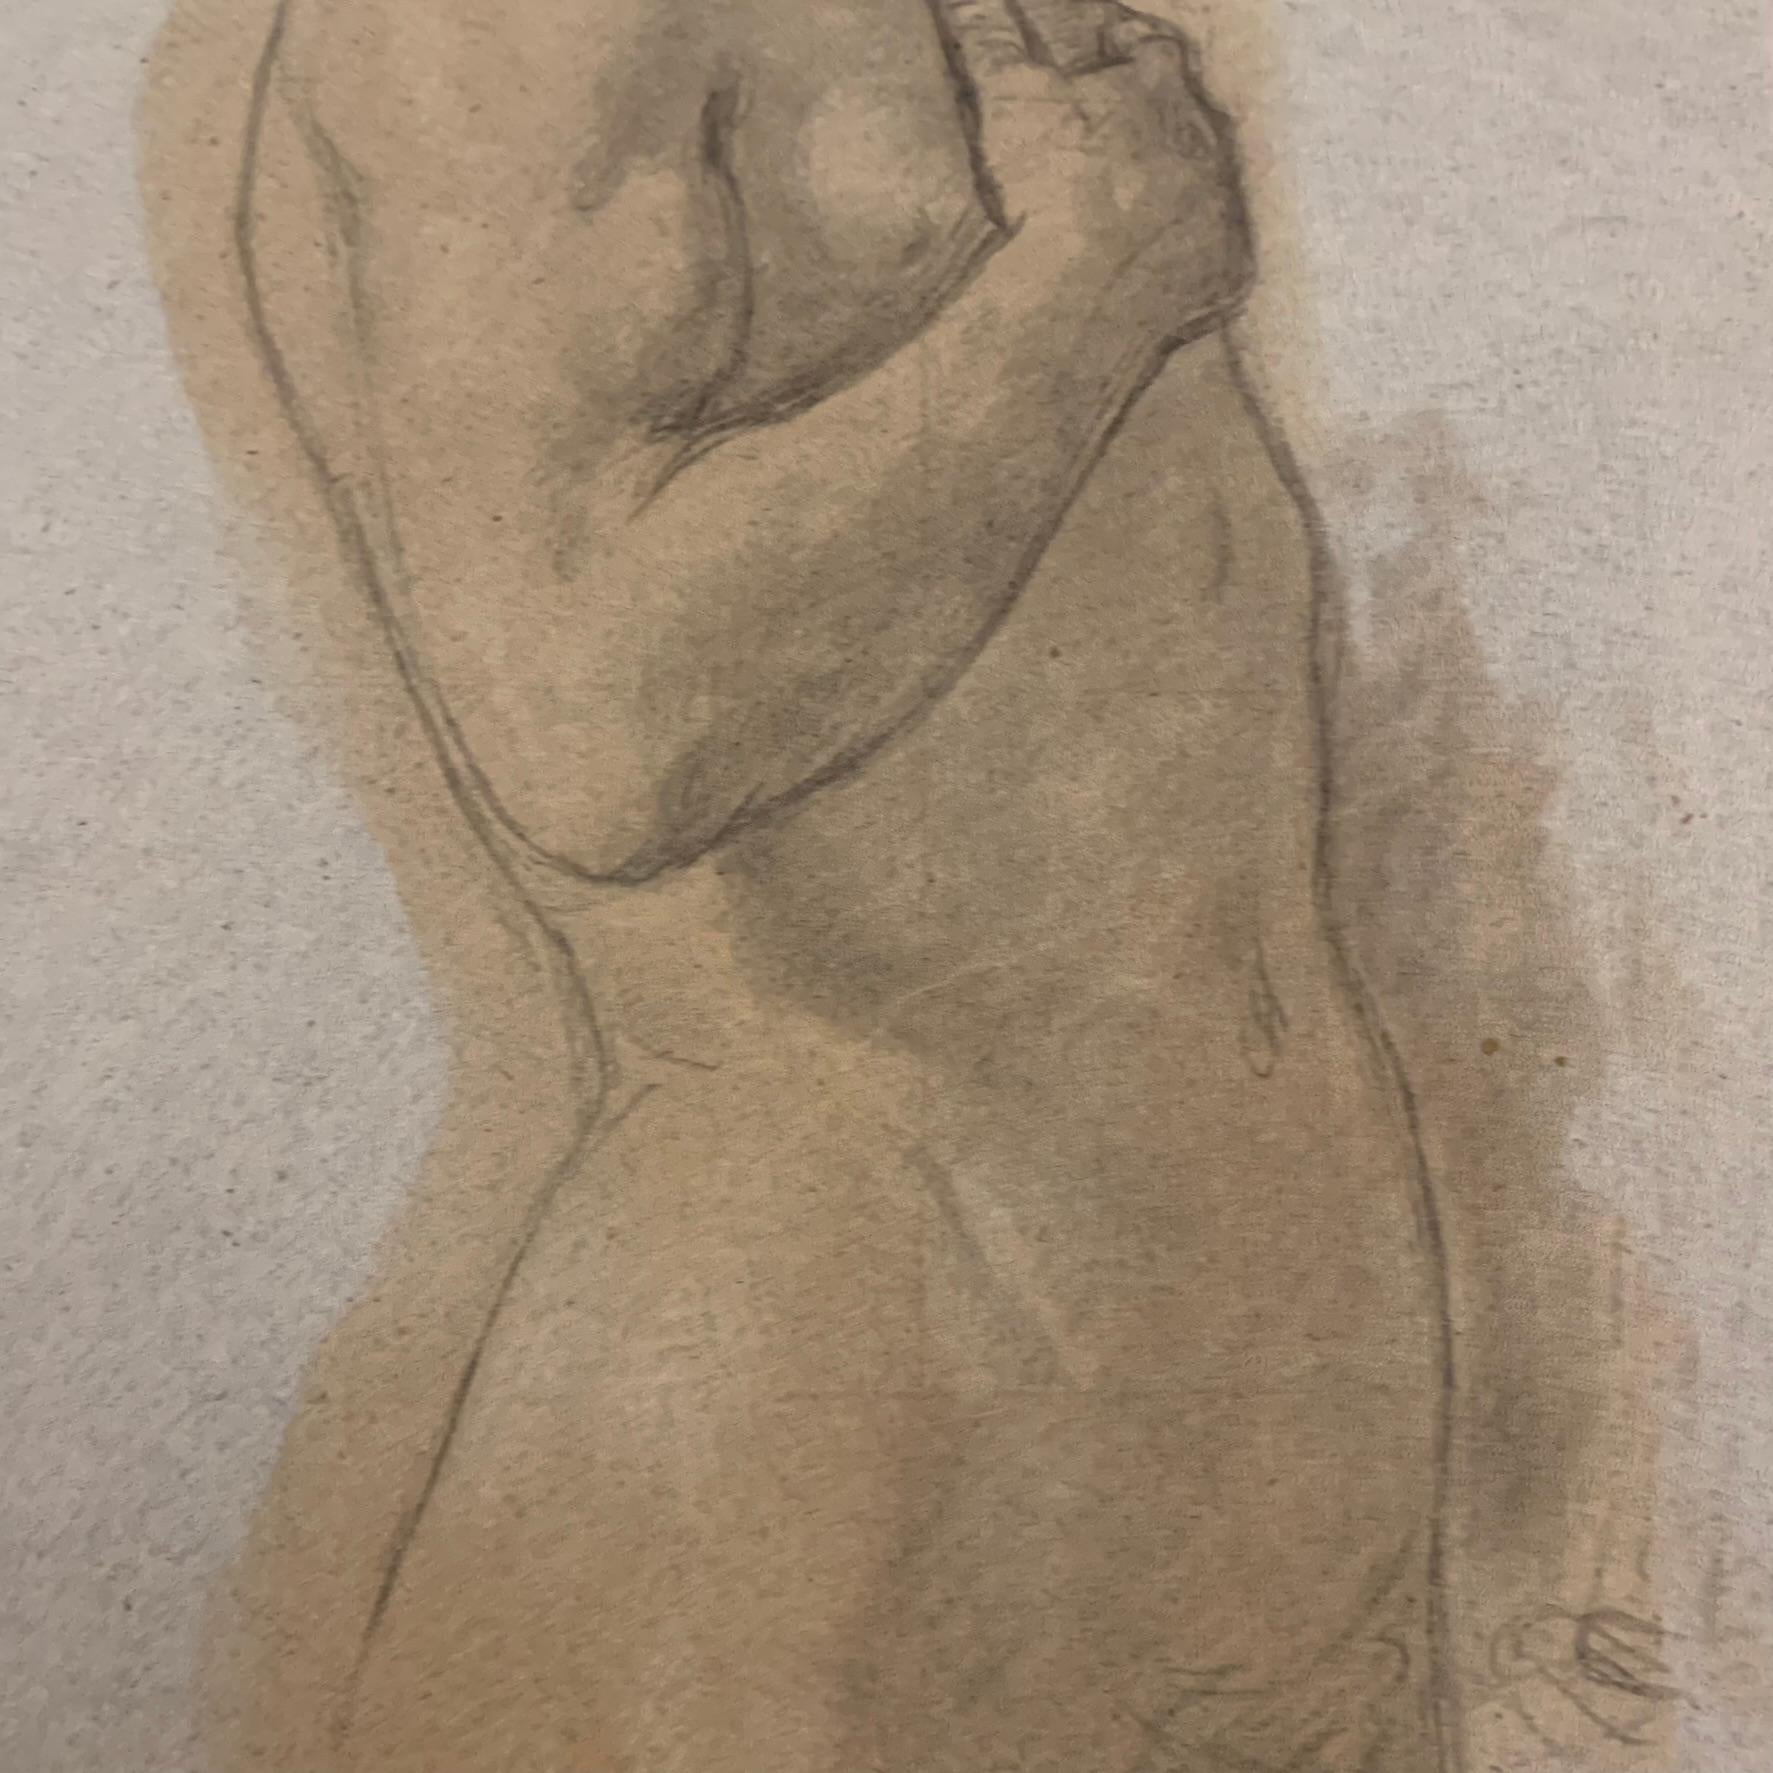 Large Academic Study Of The Nude: Handsome Man With A Beard. XIXcentury. 4